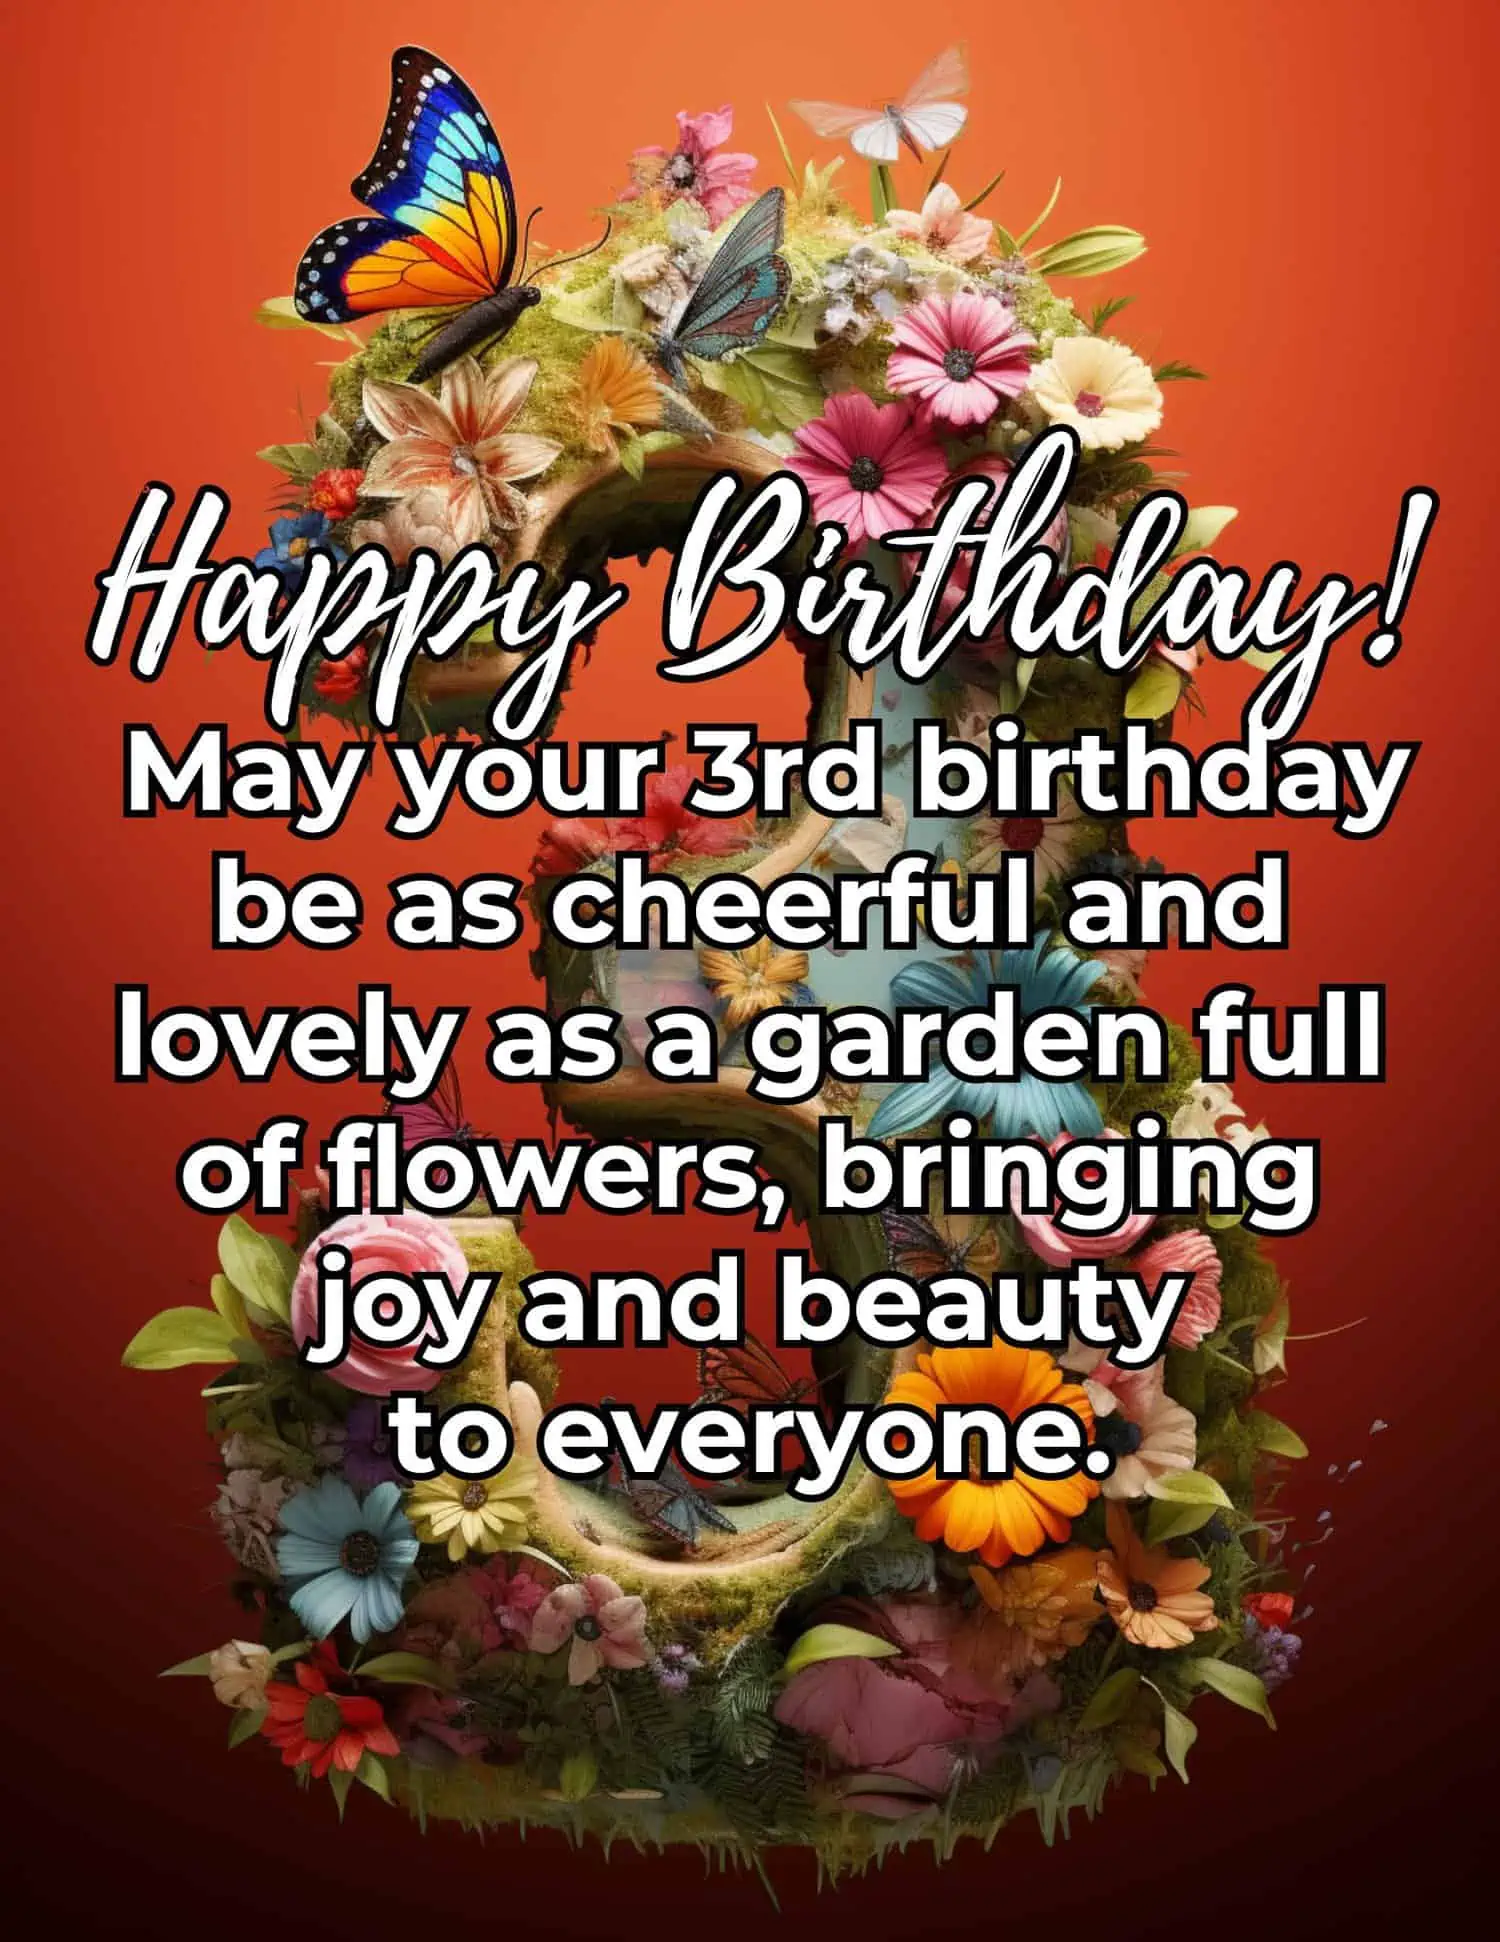 A collection of sweet and cheerful birthday wishes for a sister on her third birthday, emphasizing the love, joy, and special bond that comes with growing up together.